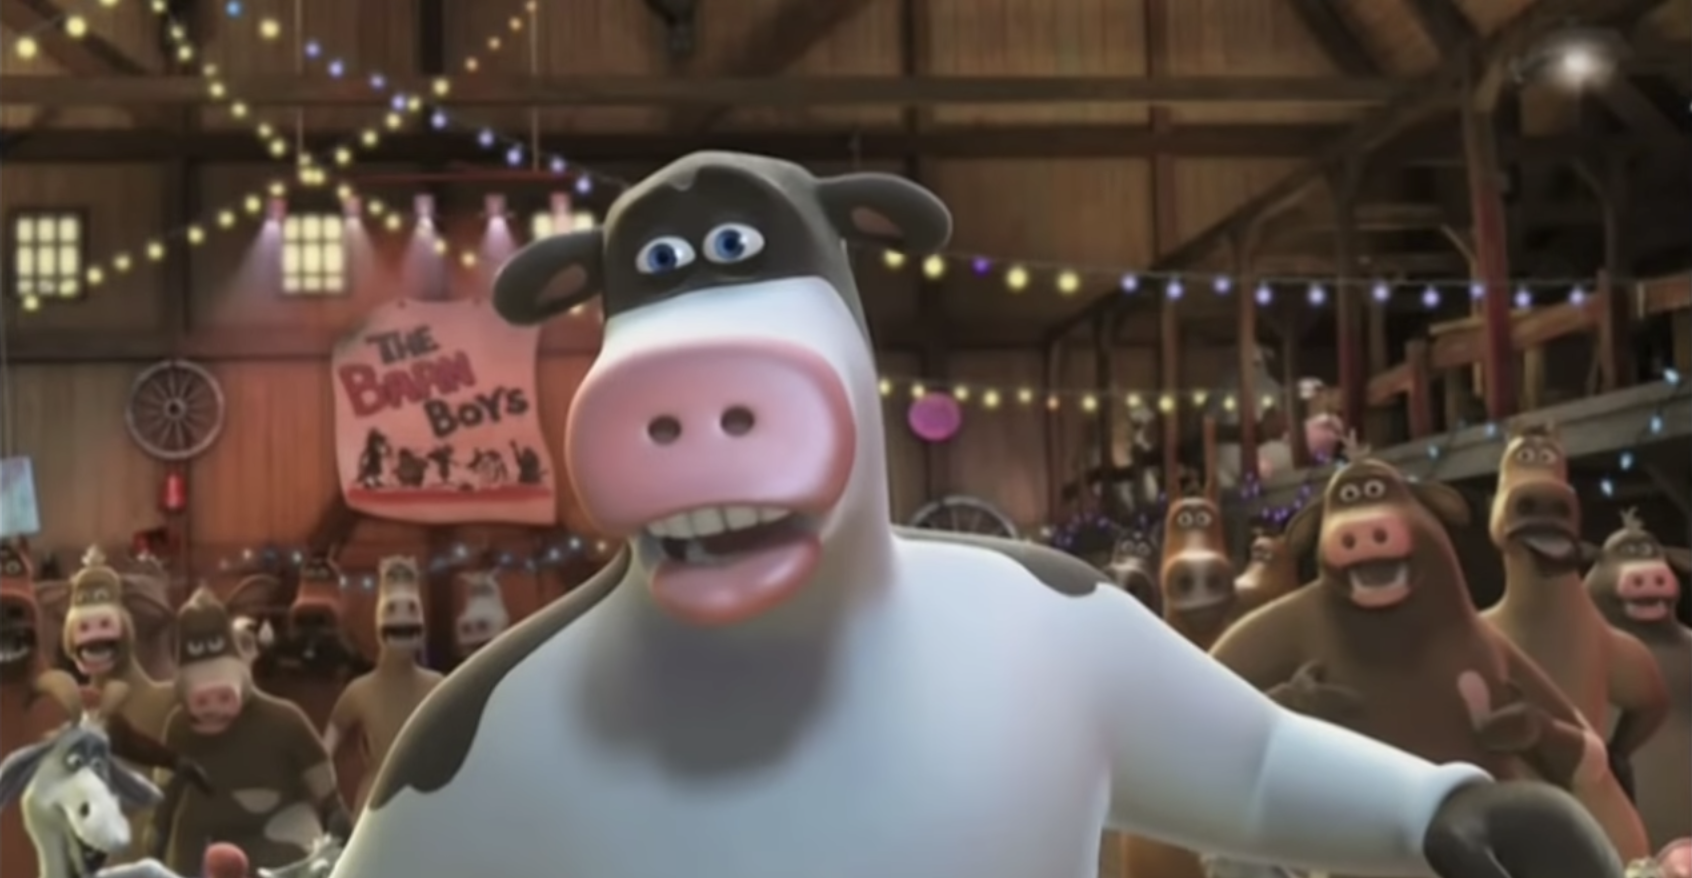 Otis the cow opens his mouth in shock